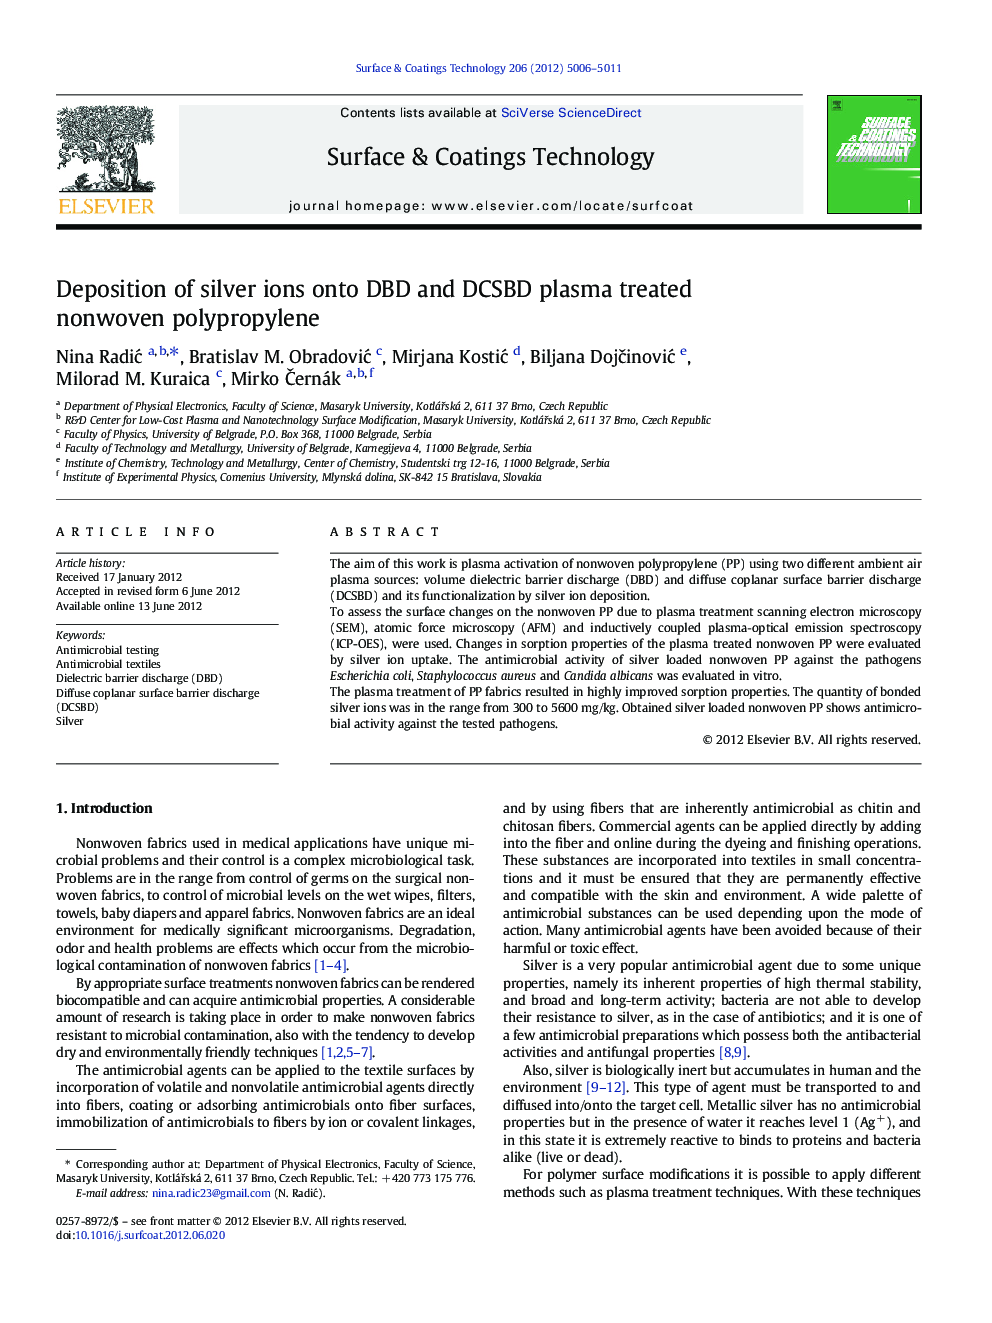 Deposition of silver ions onto DBD and DCSBD plasma treated nonwoven polypropylene